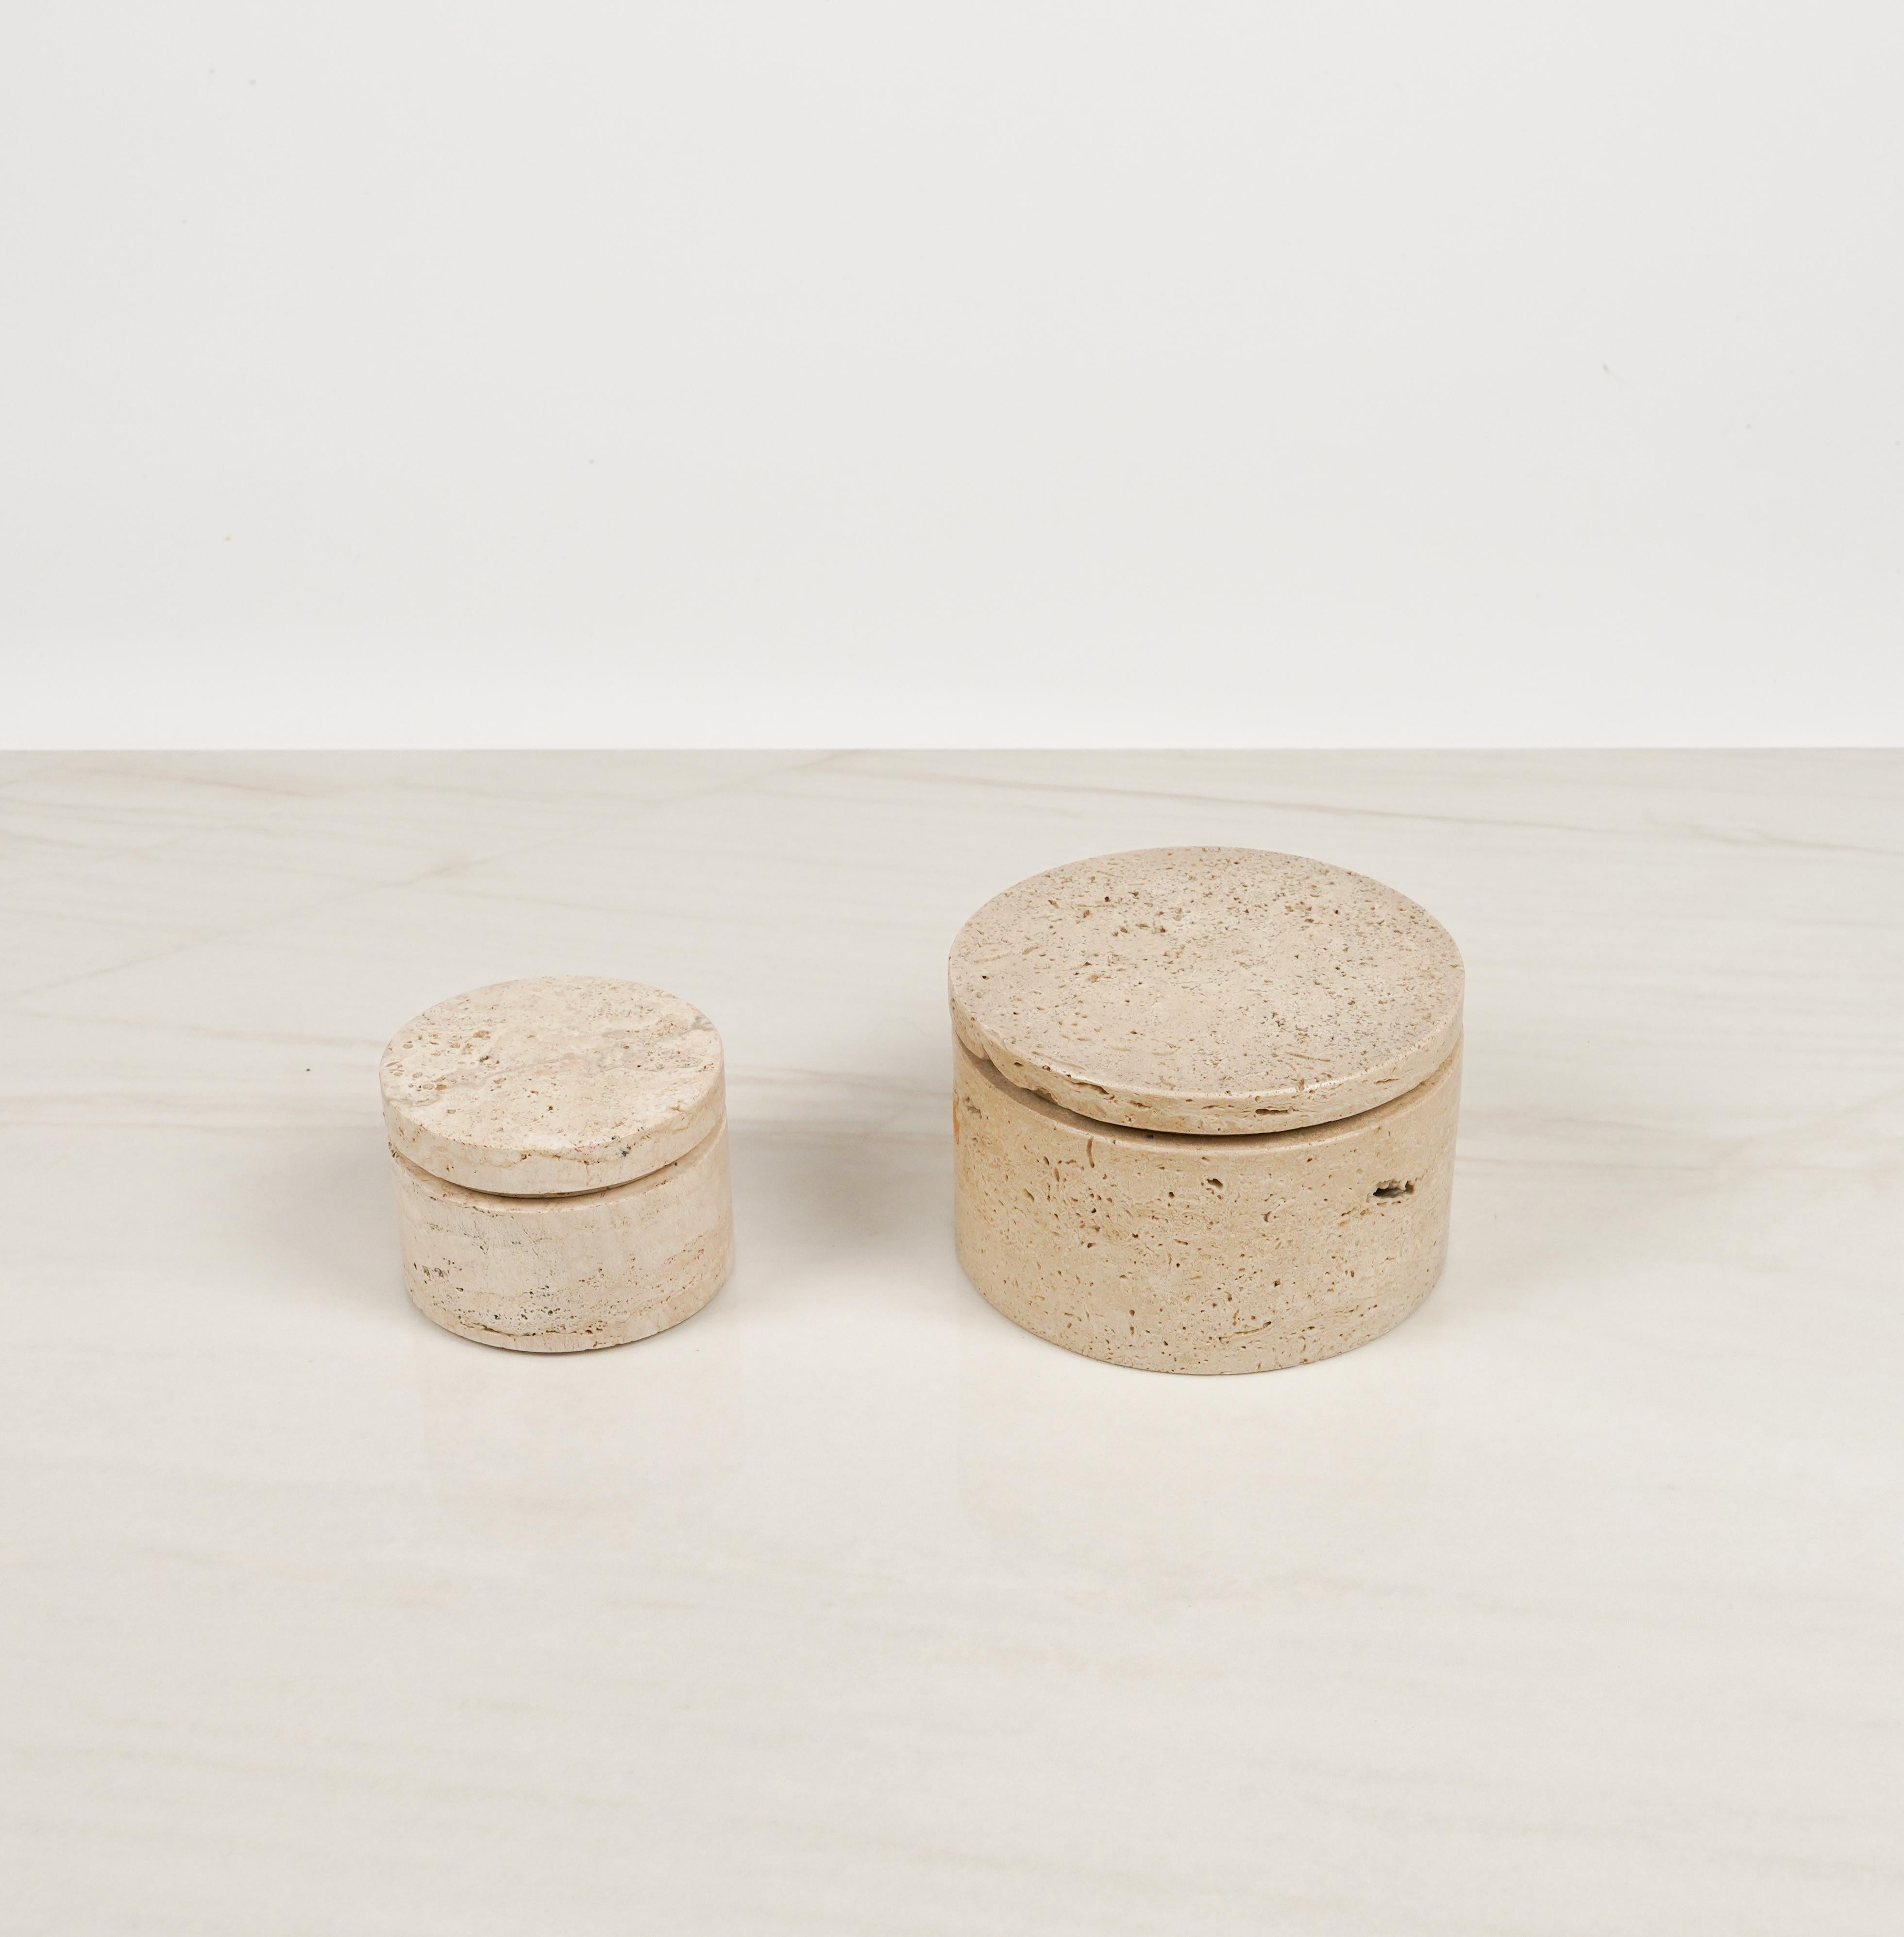 Midcentury Pair of Decorative Box in Travertine Enzo Mari Style, Italy 1970s For Sale 1